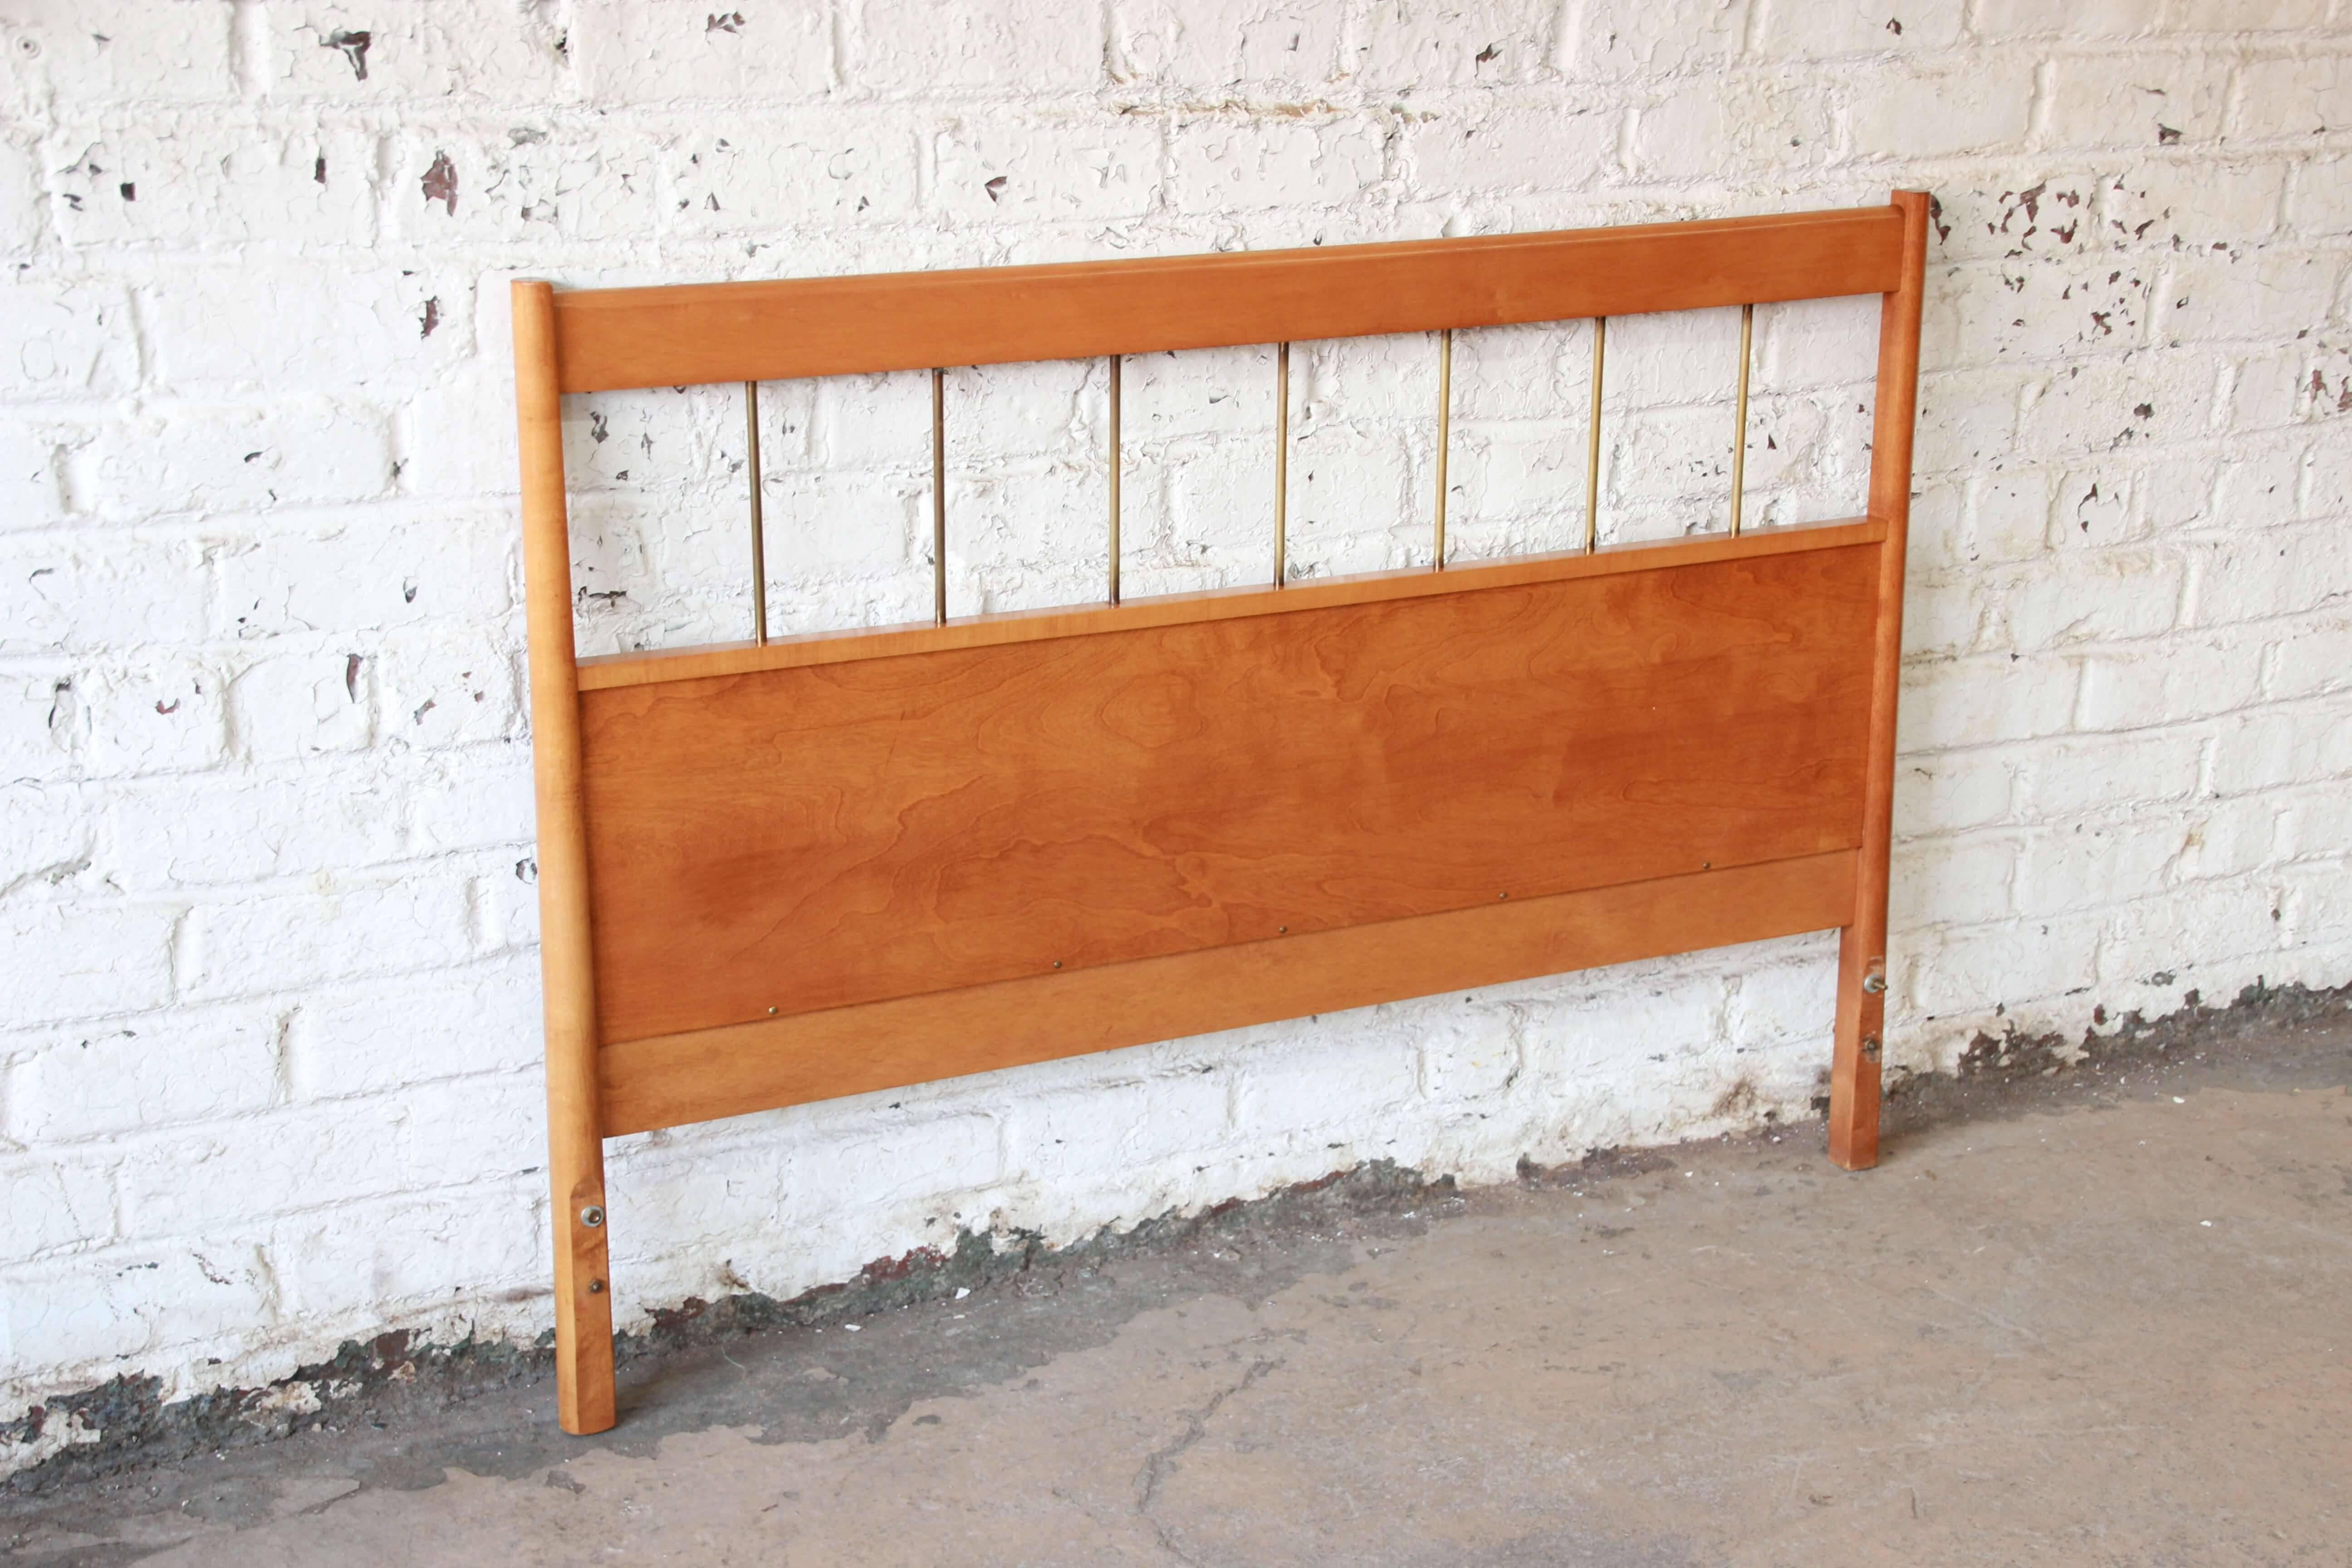 Offering a rare full size headboard designed by Paul McCobb for his iconic Planner Group line for Winchendon Furniture. The headboard feature stunning wood grain and brass spindles. It is made from solid birch and in excellent vintage condition.